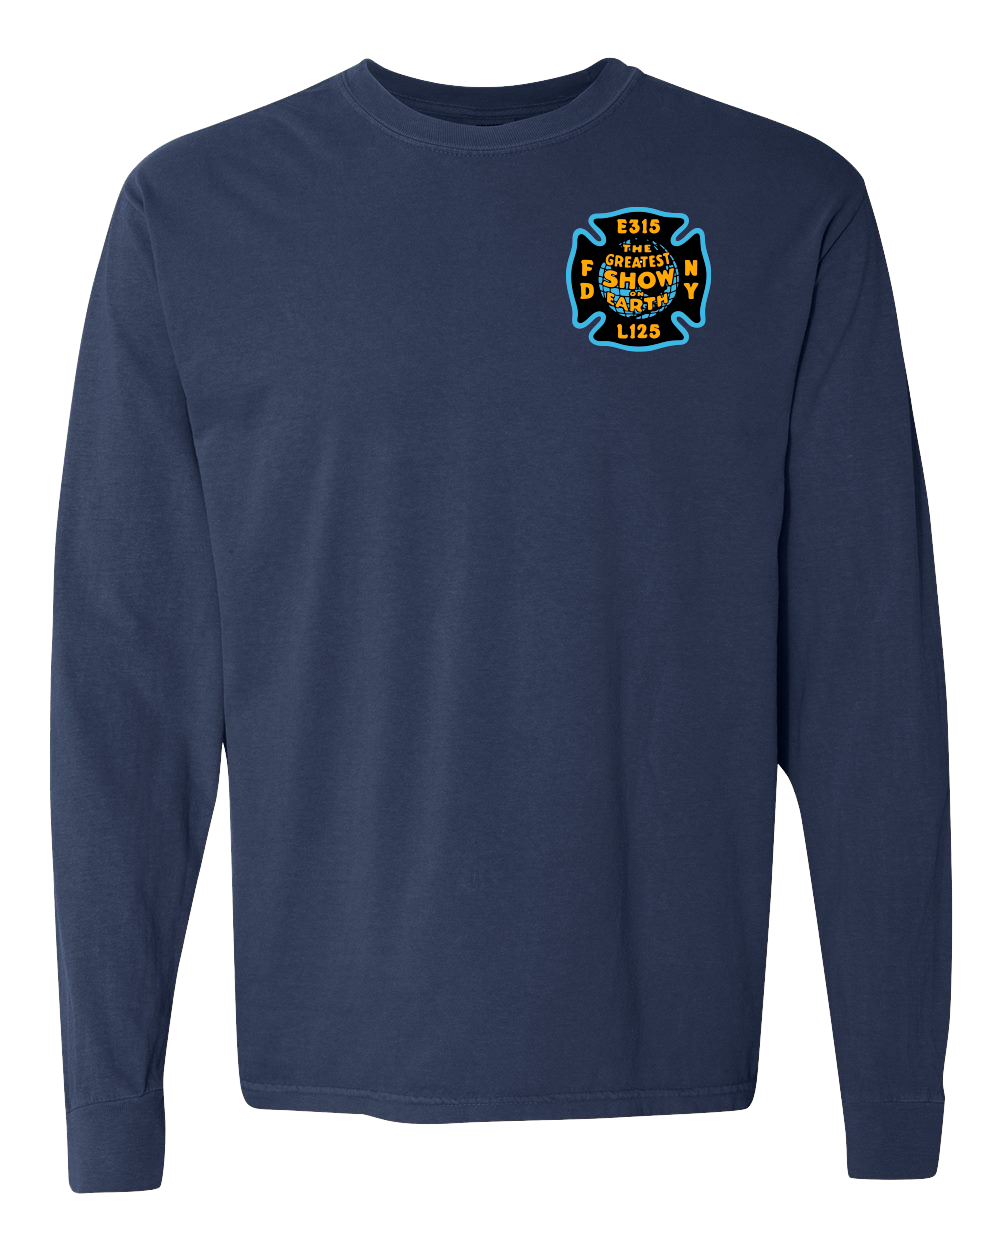 FDNY® E315 L125 &quot; Greatest Show On Earth &quot; Long Sleeve